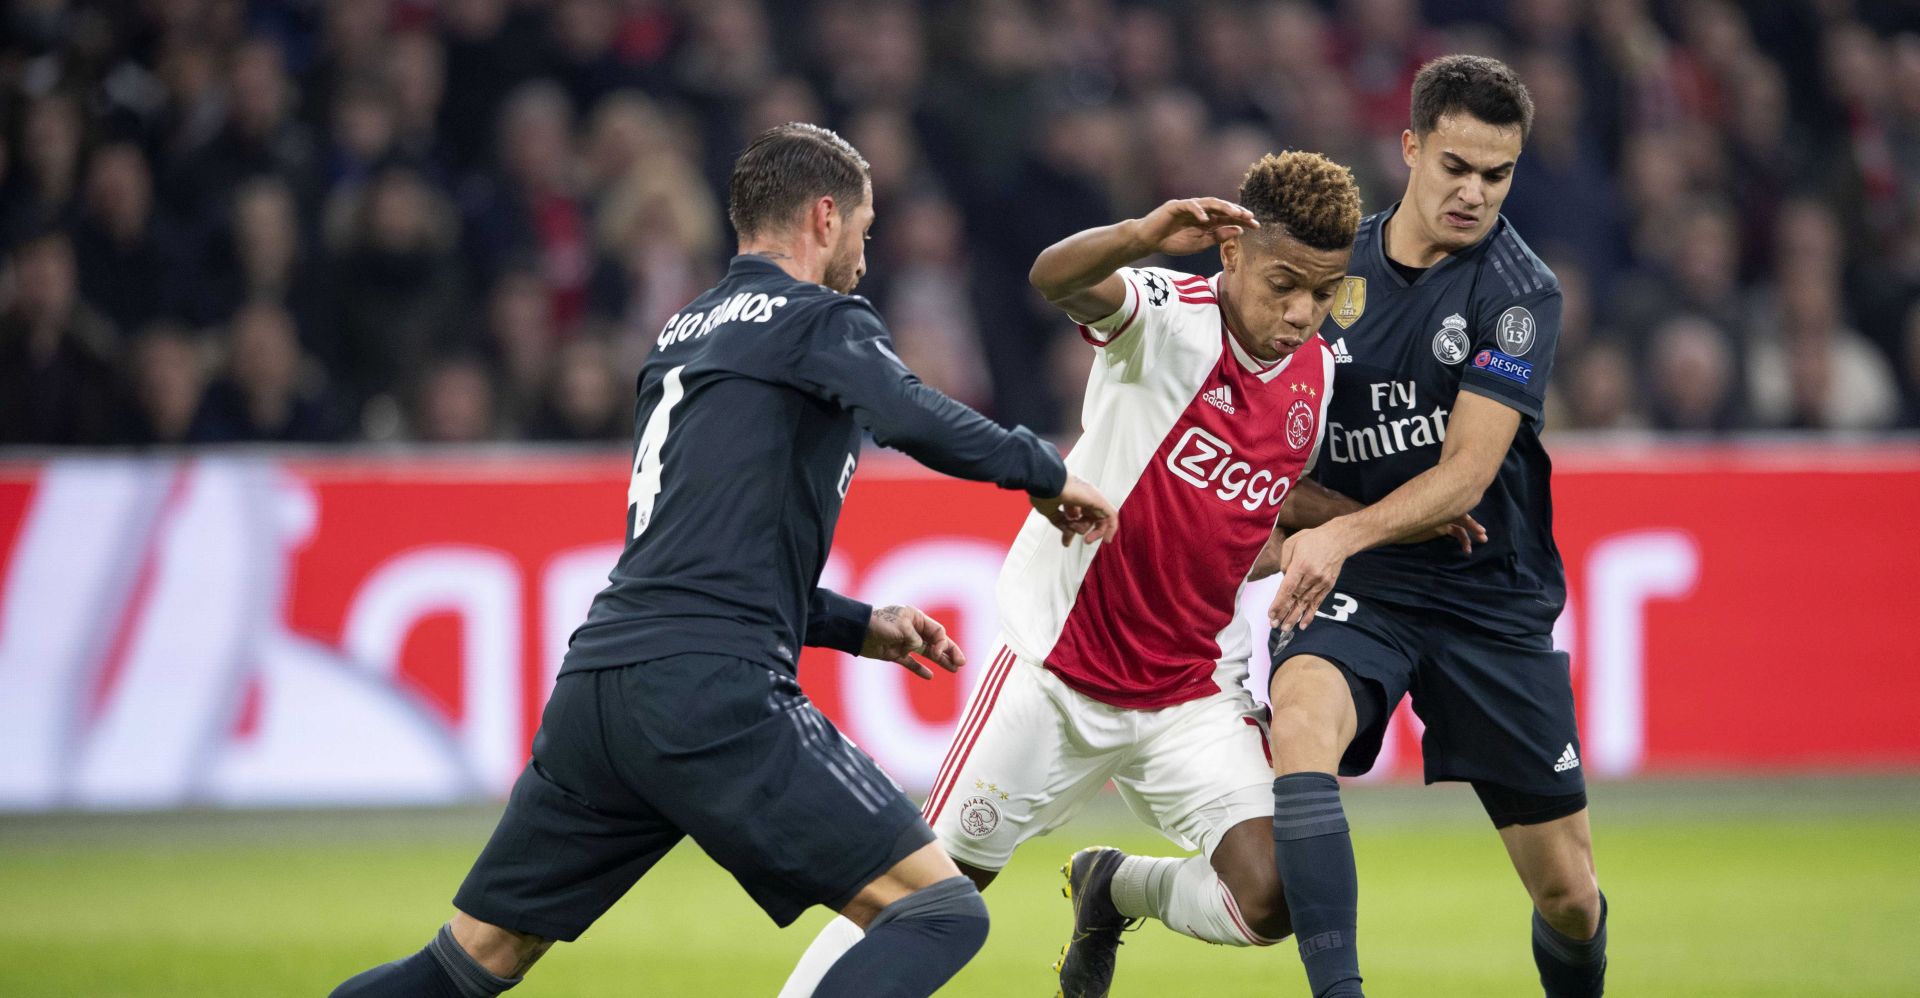 epa07367856 David Neres (C) of Ajax Amsterdam in action with Real Madrids Sergio Ramos (L) and Sergio Reguilon during the UEFA Champions League round of 16 first leg soccer match between Ajax Amsterdam and Real Madrid in AMsterdam, Netherlands,  13 February 2019.  EPA/OLAF KRAAK